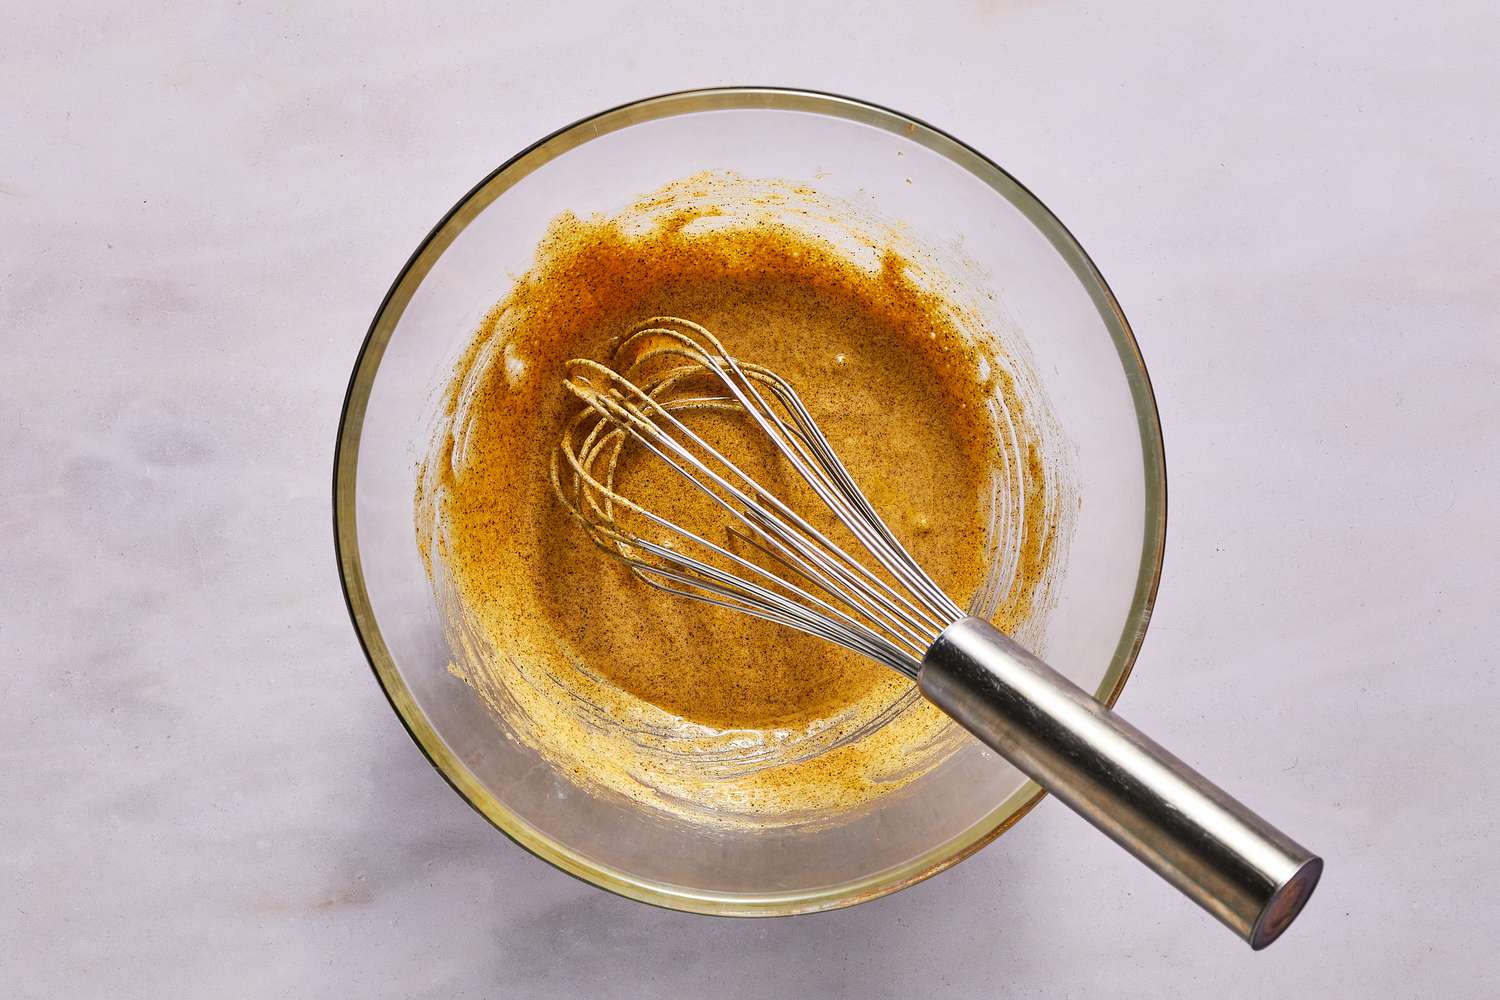 egg yolks whisked with other ingredients